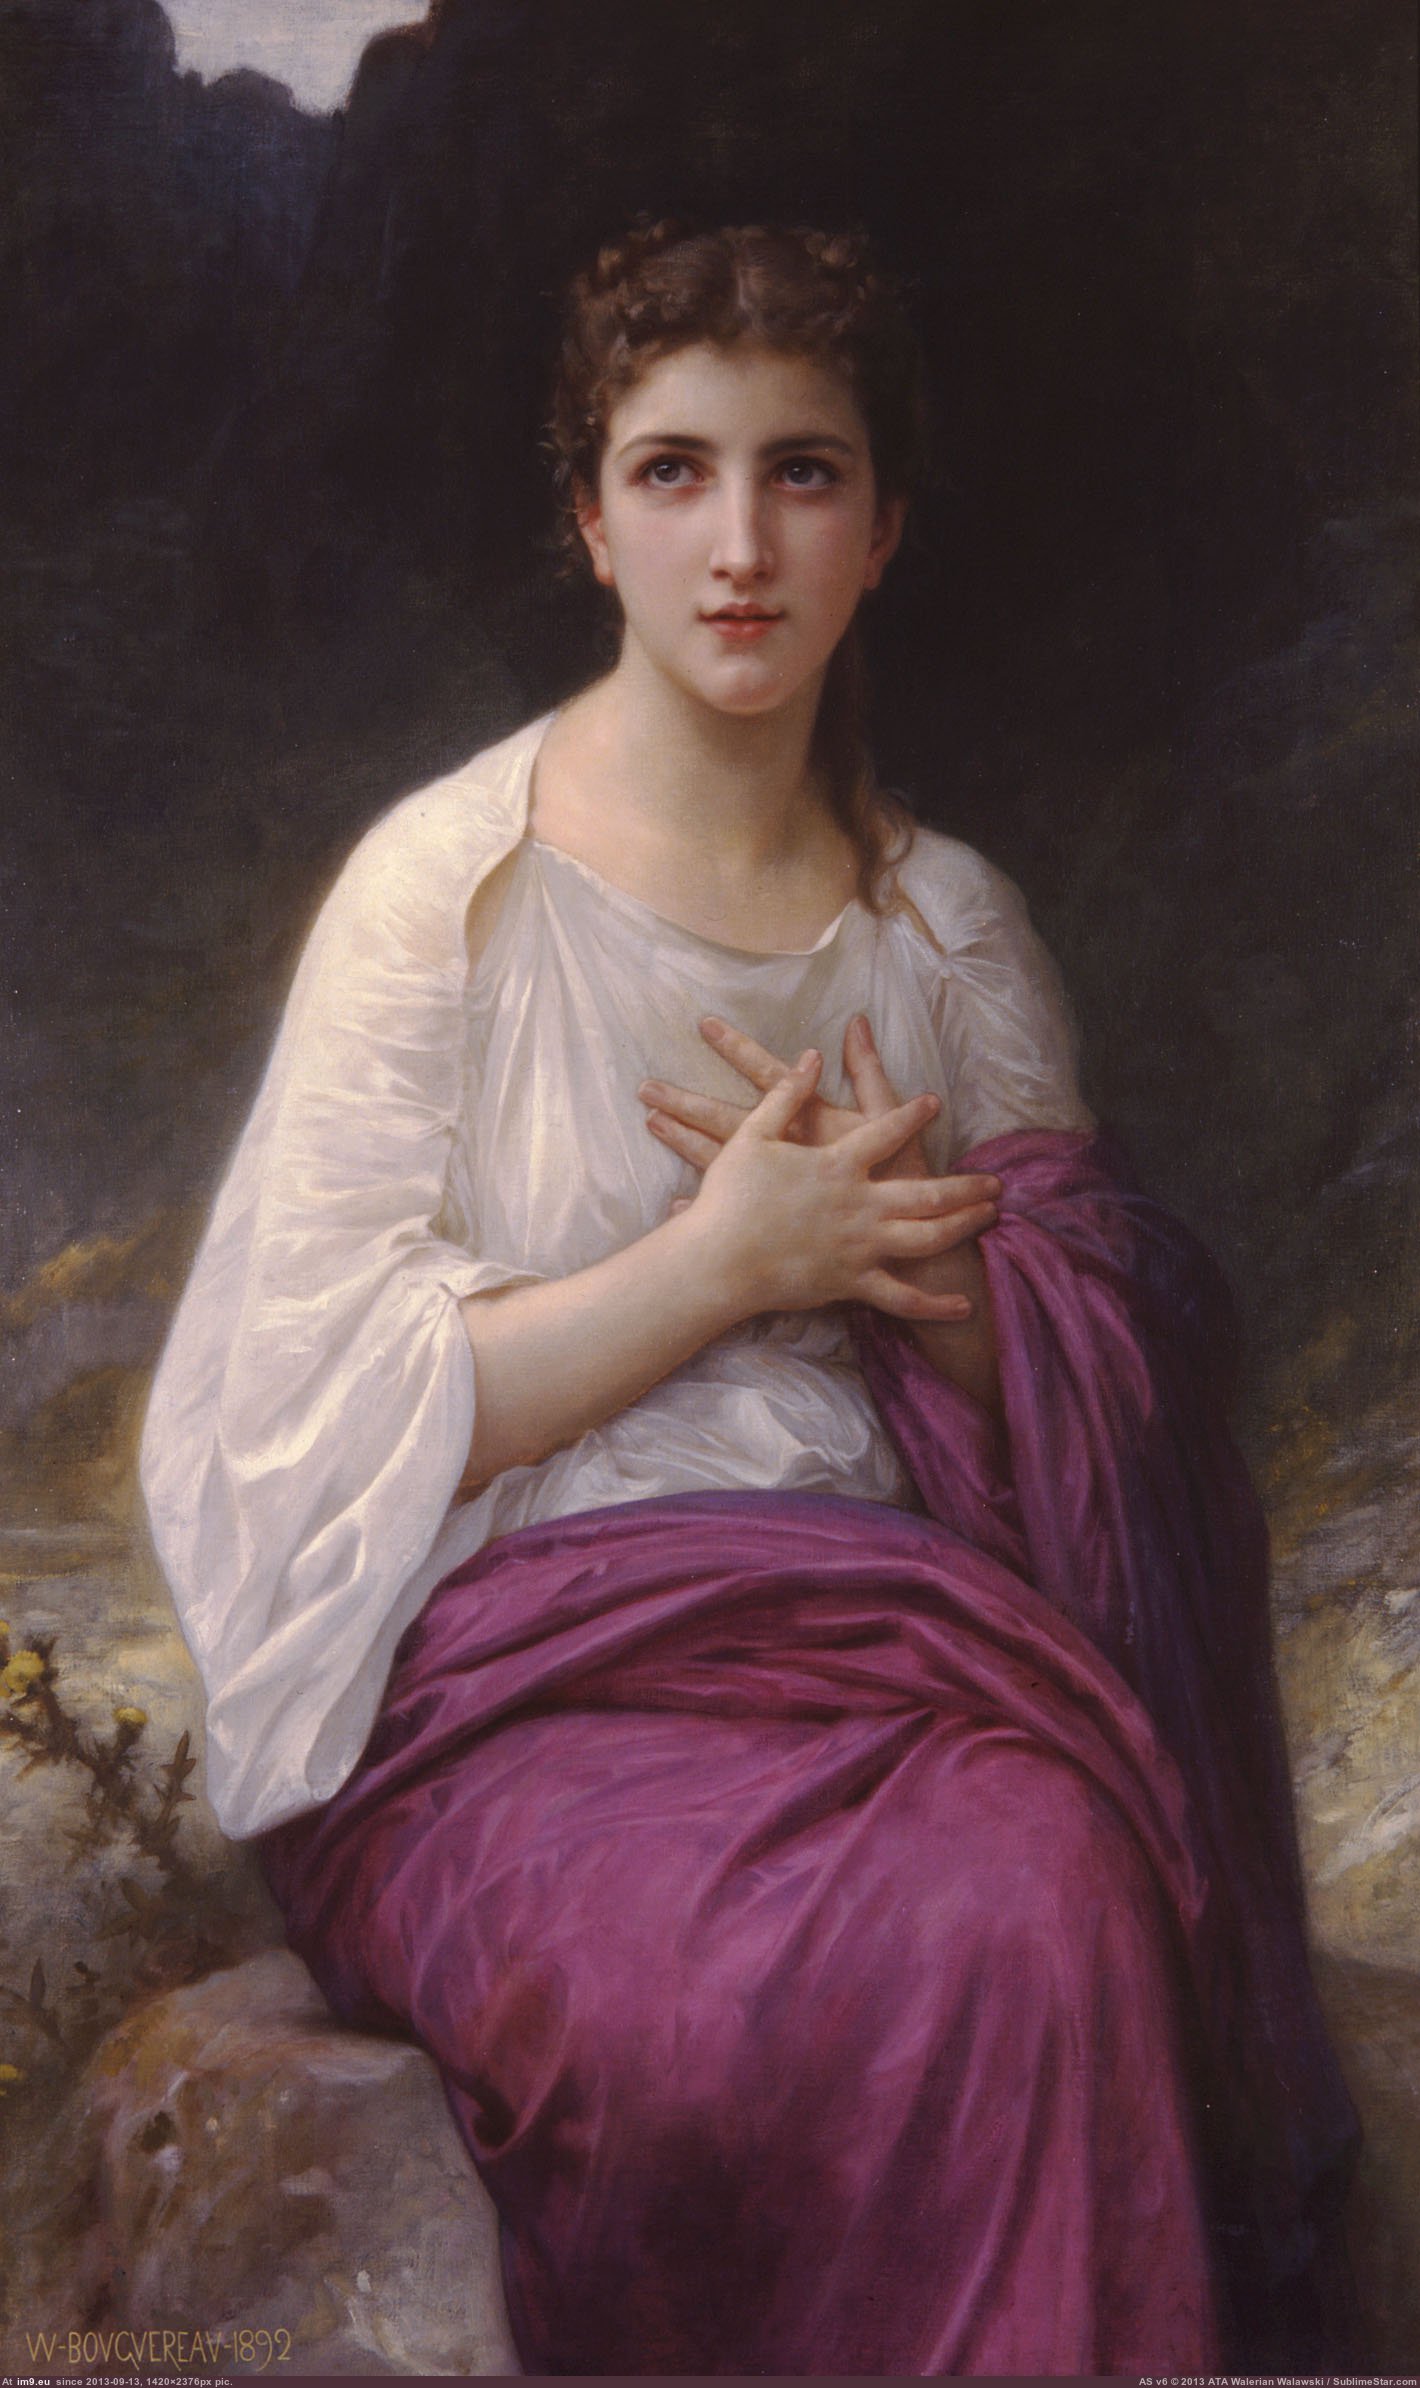 (1892) Psyche - William Adolphe Bouguereau (in William Adolphe Bouguereau paintings (1825-1905))